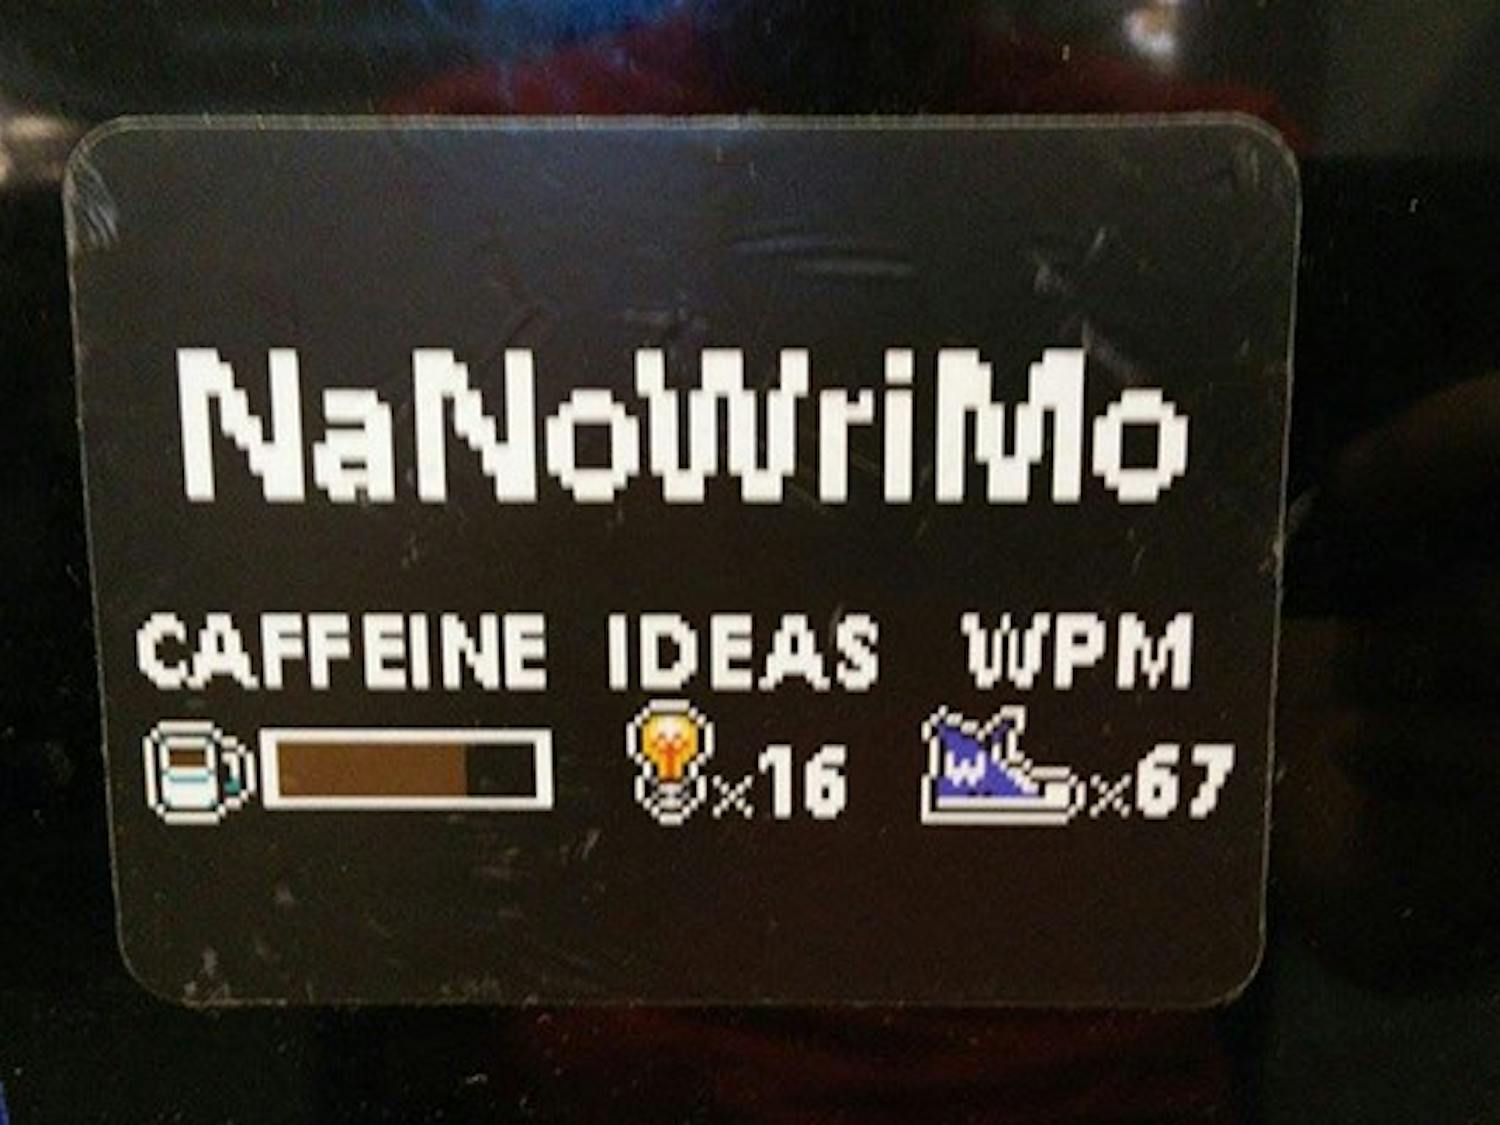 Special NaNoWriMo memorabilia like stickers and key chains are awarded to "word sprint" winners at events all around Phoenix. (Photo by Zach Heltzel) 